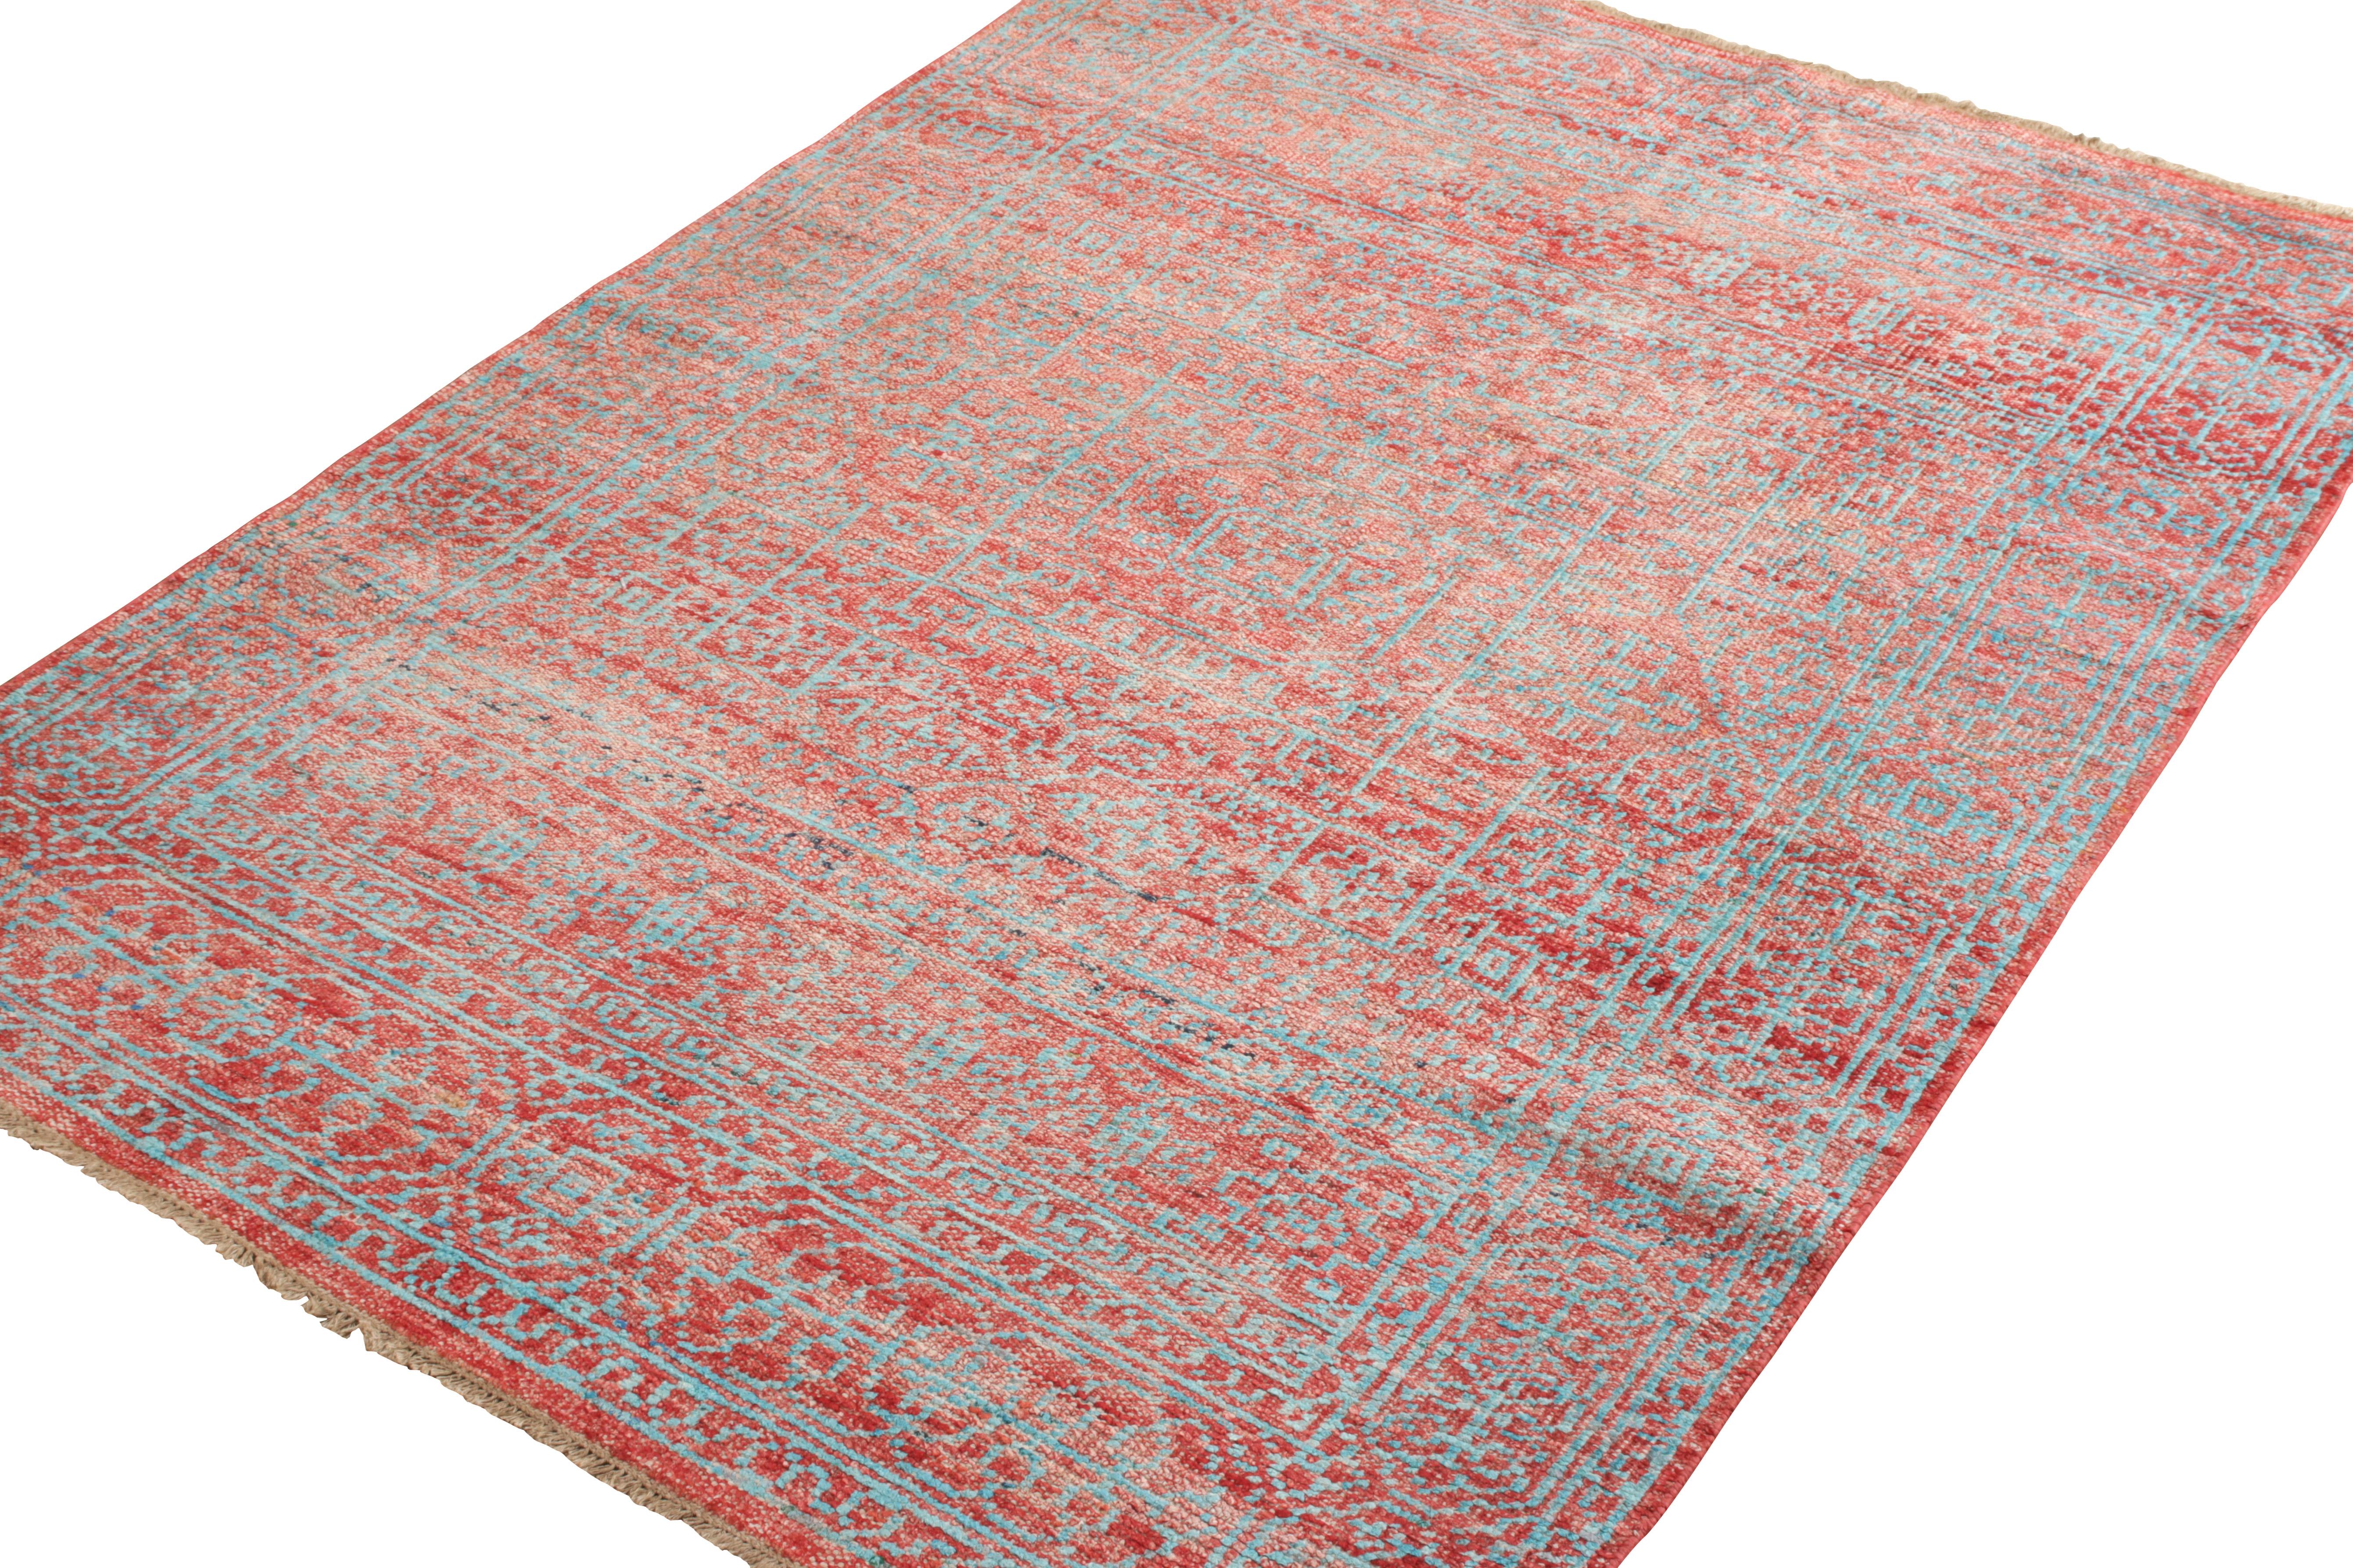 Indian Rug & Kilim’s Modern Rug in All over Red and Blue Geometric Pattern For Sale